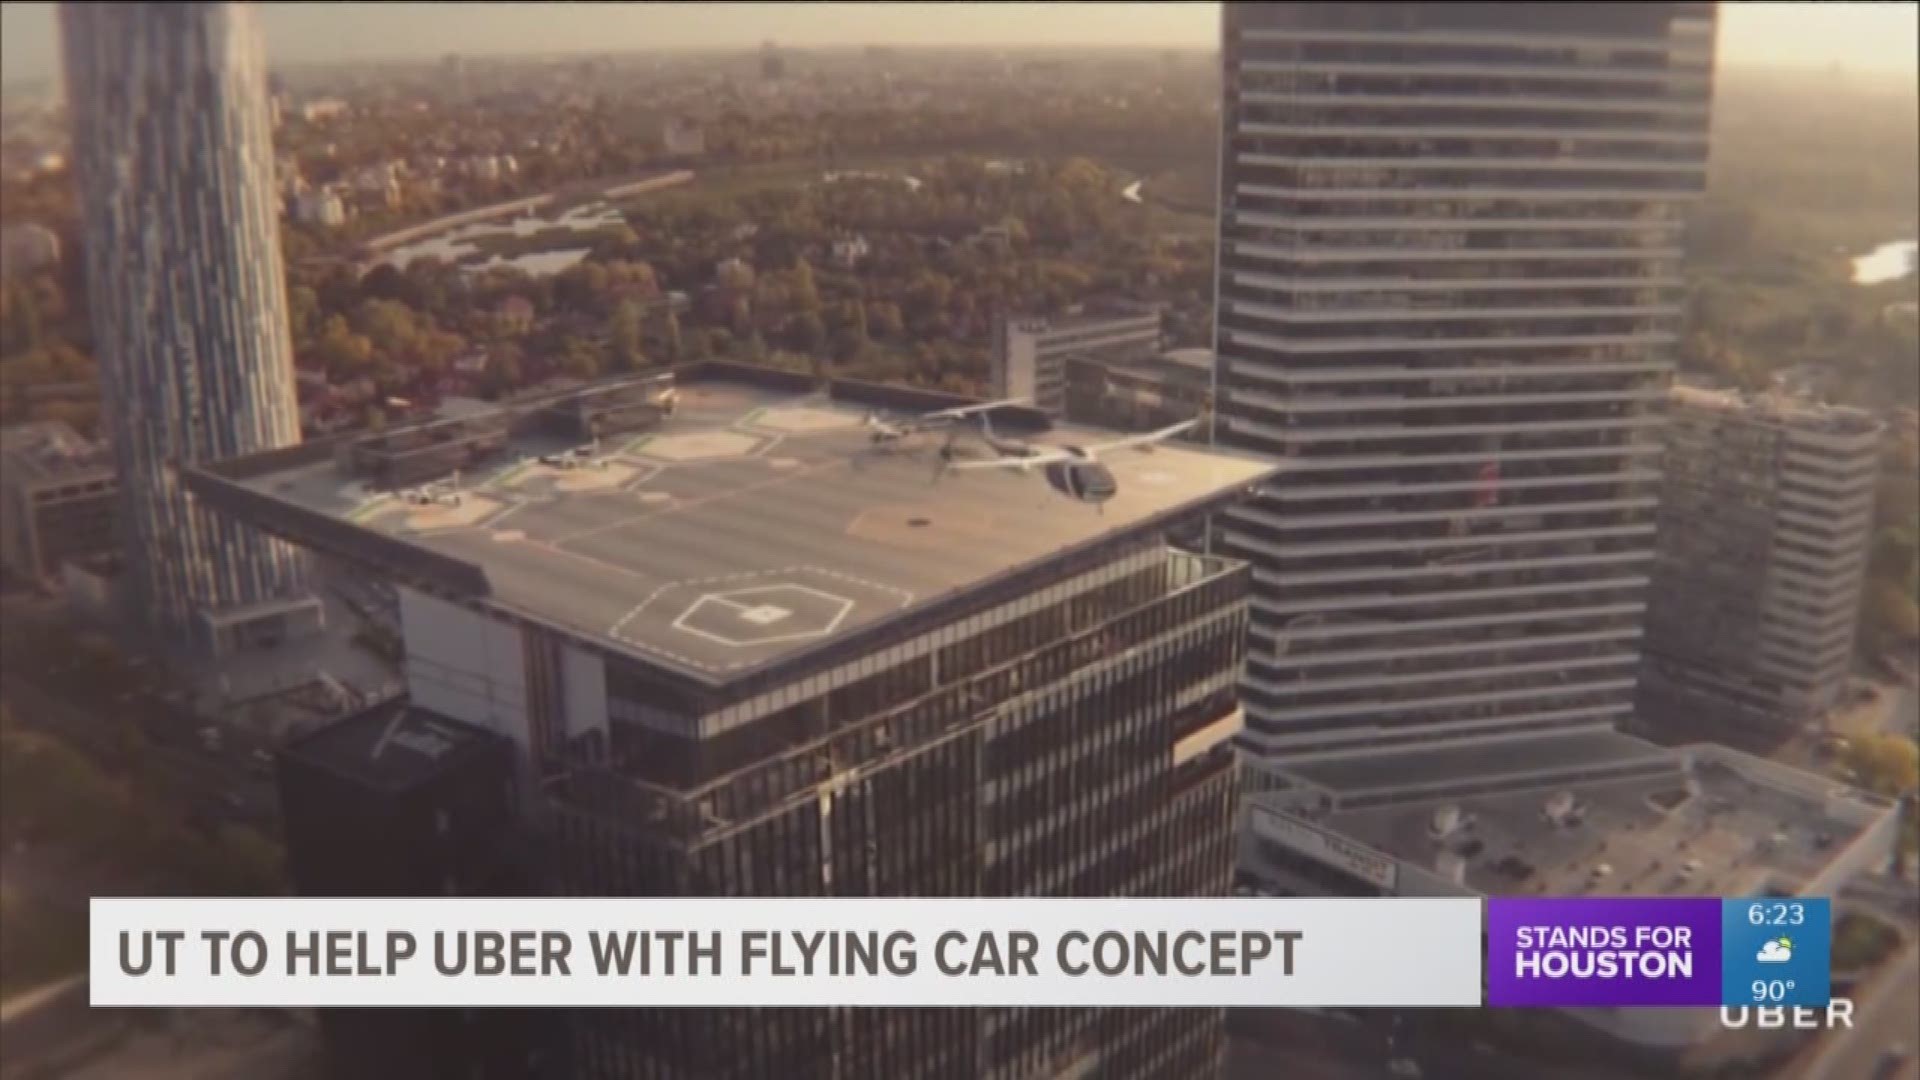 Researchers at the University of Texas in Austin will be helping Uber get a new program off the ground. The Longhorns are helping develop new rotor technology for Uber Air. The company says passengers will request an Uber Air on their phone and then head 